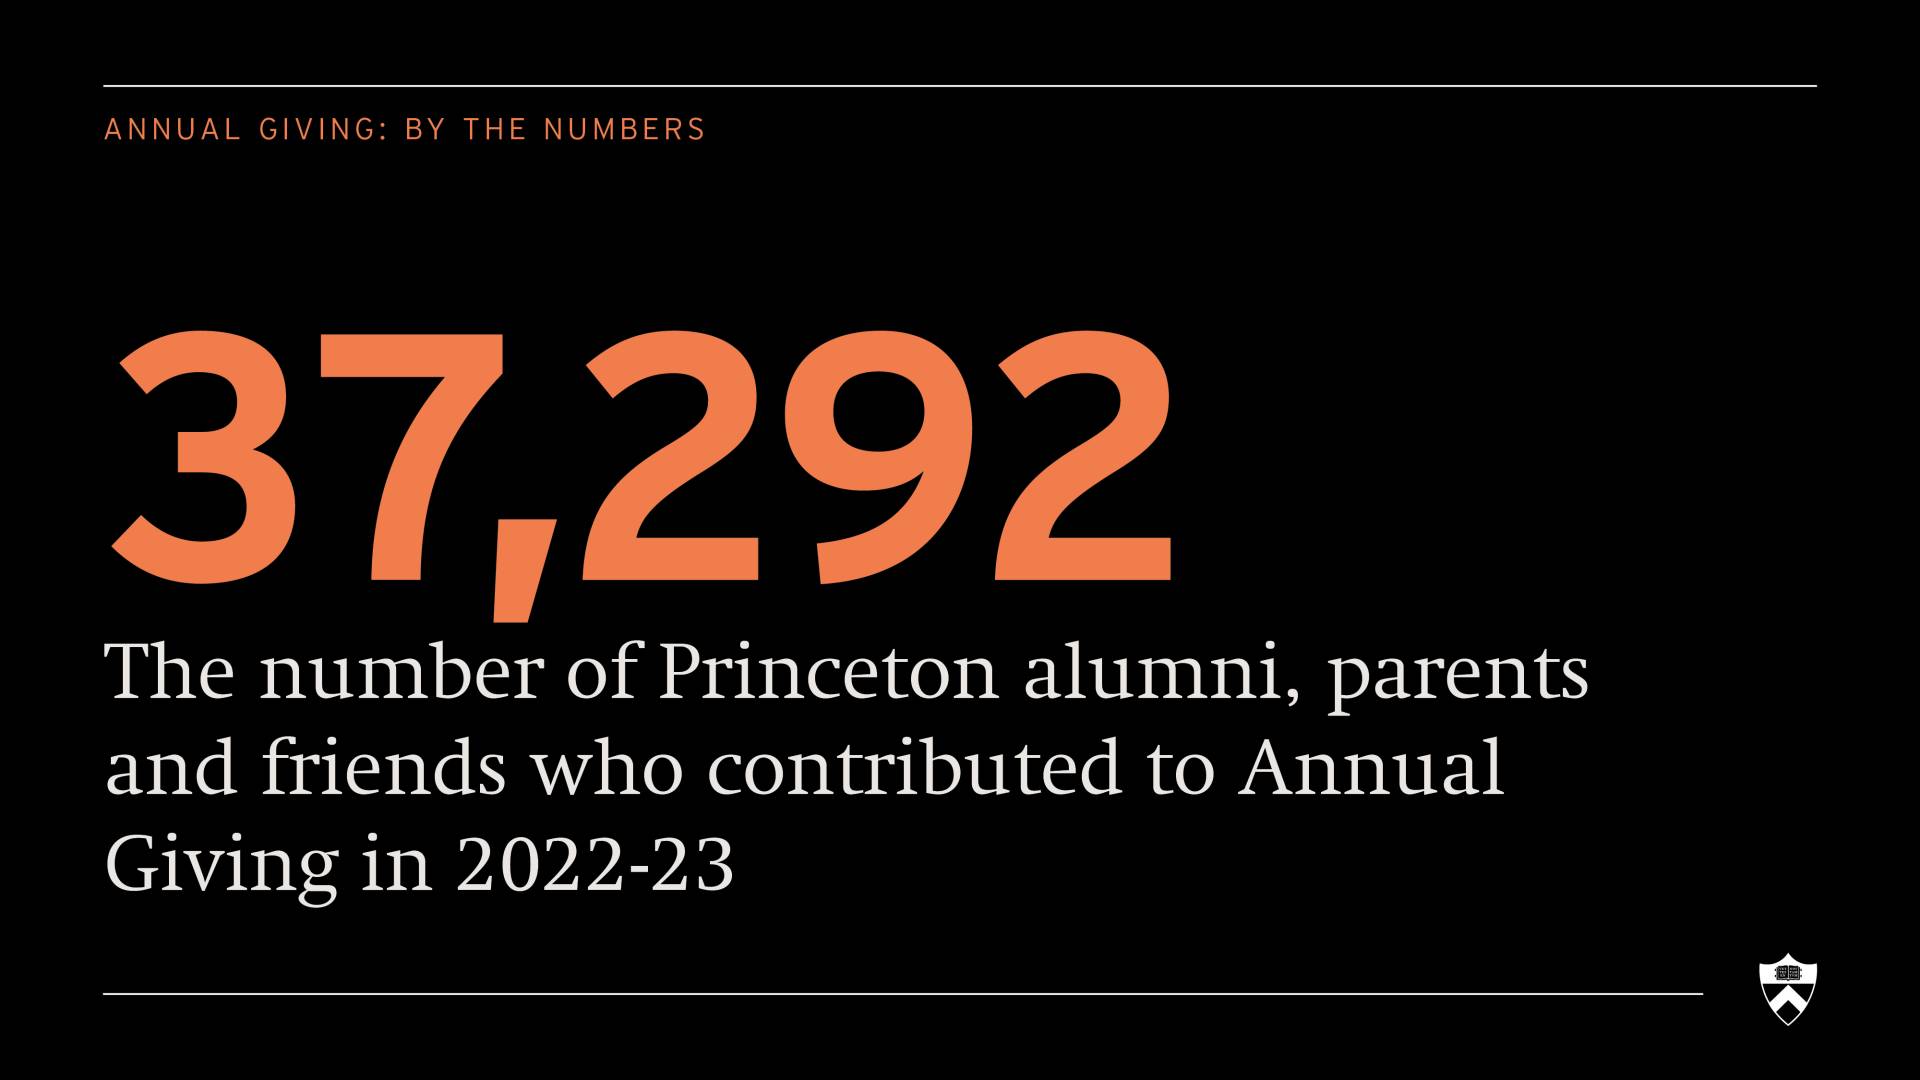 The number of Princeton alumni, parents and friends who contributed to Annual Giving in 2022-23: 37,292